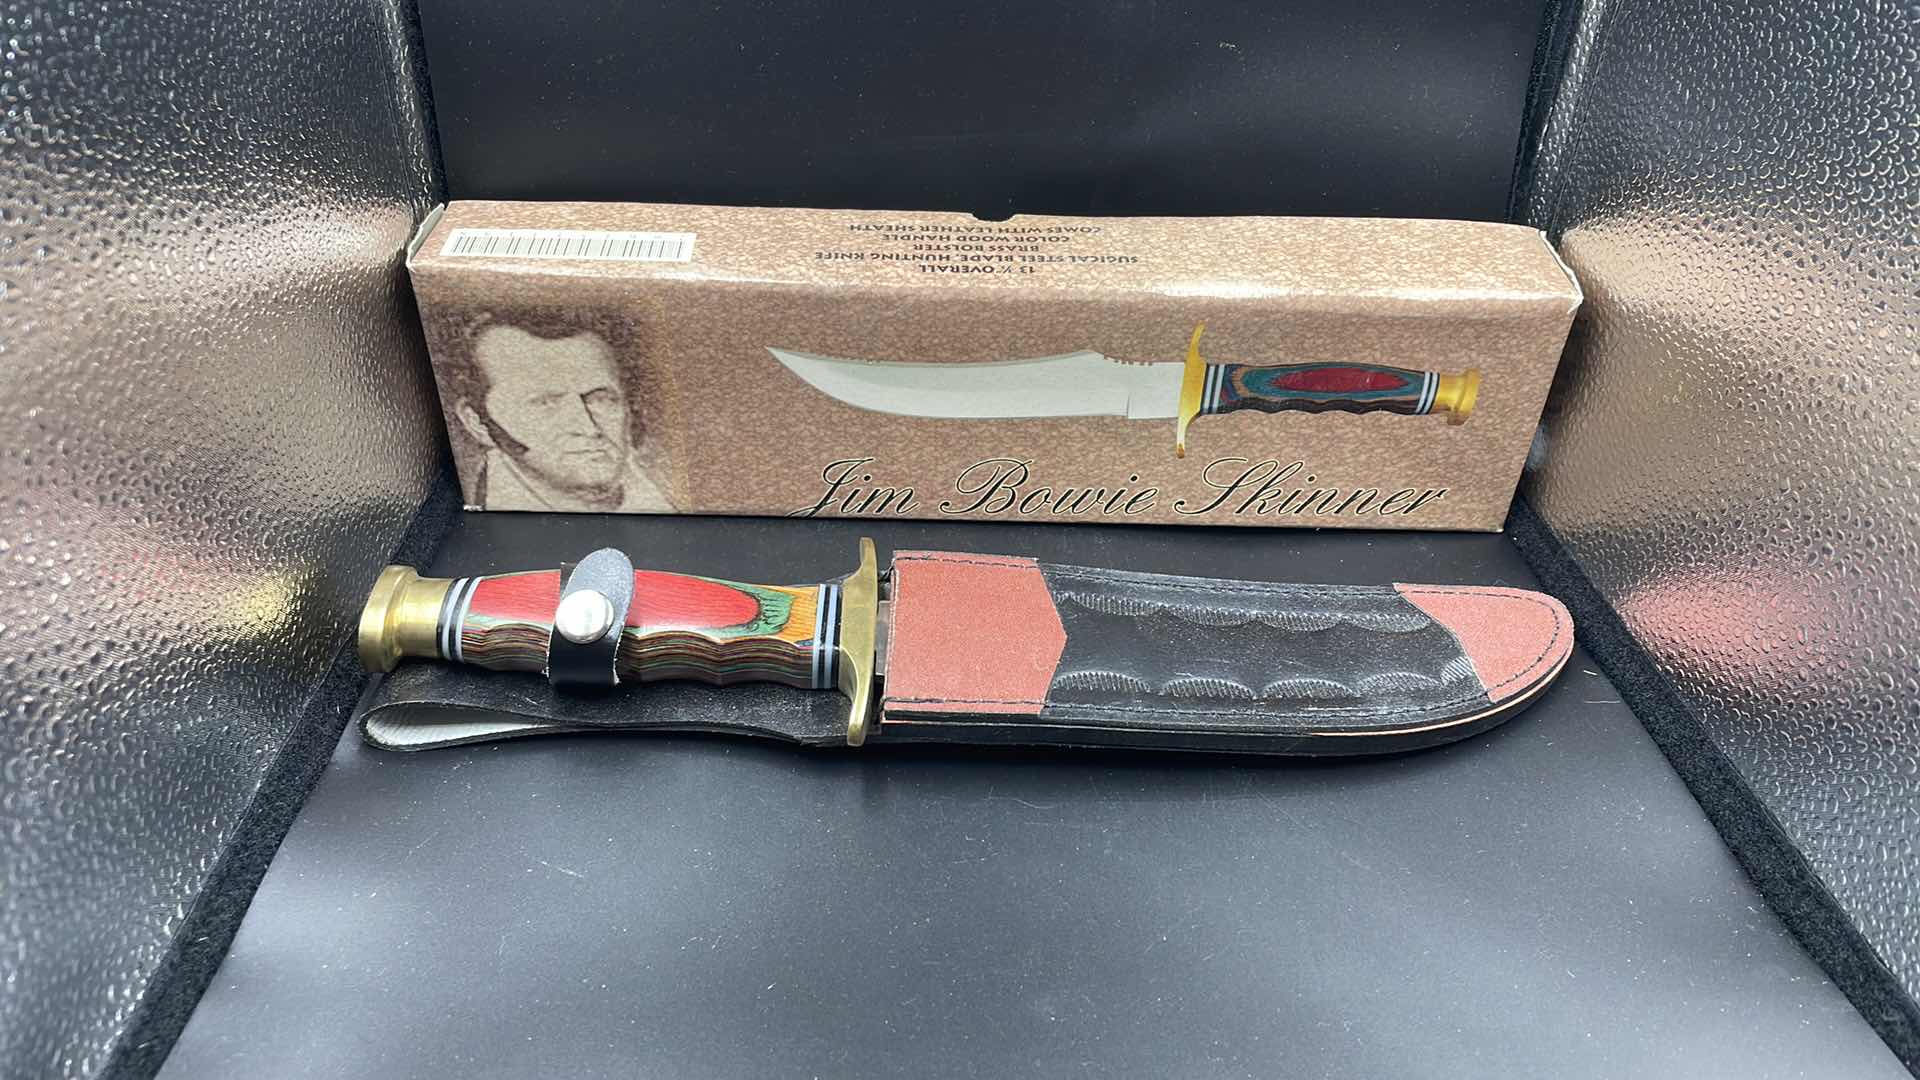 Photo 2 of JIM BOWIE SKINNER BLADE AND SHEATH 13”